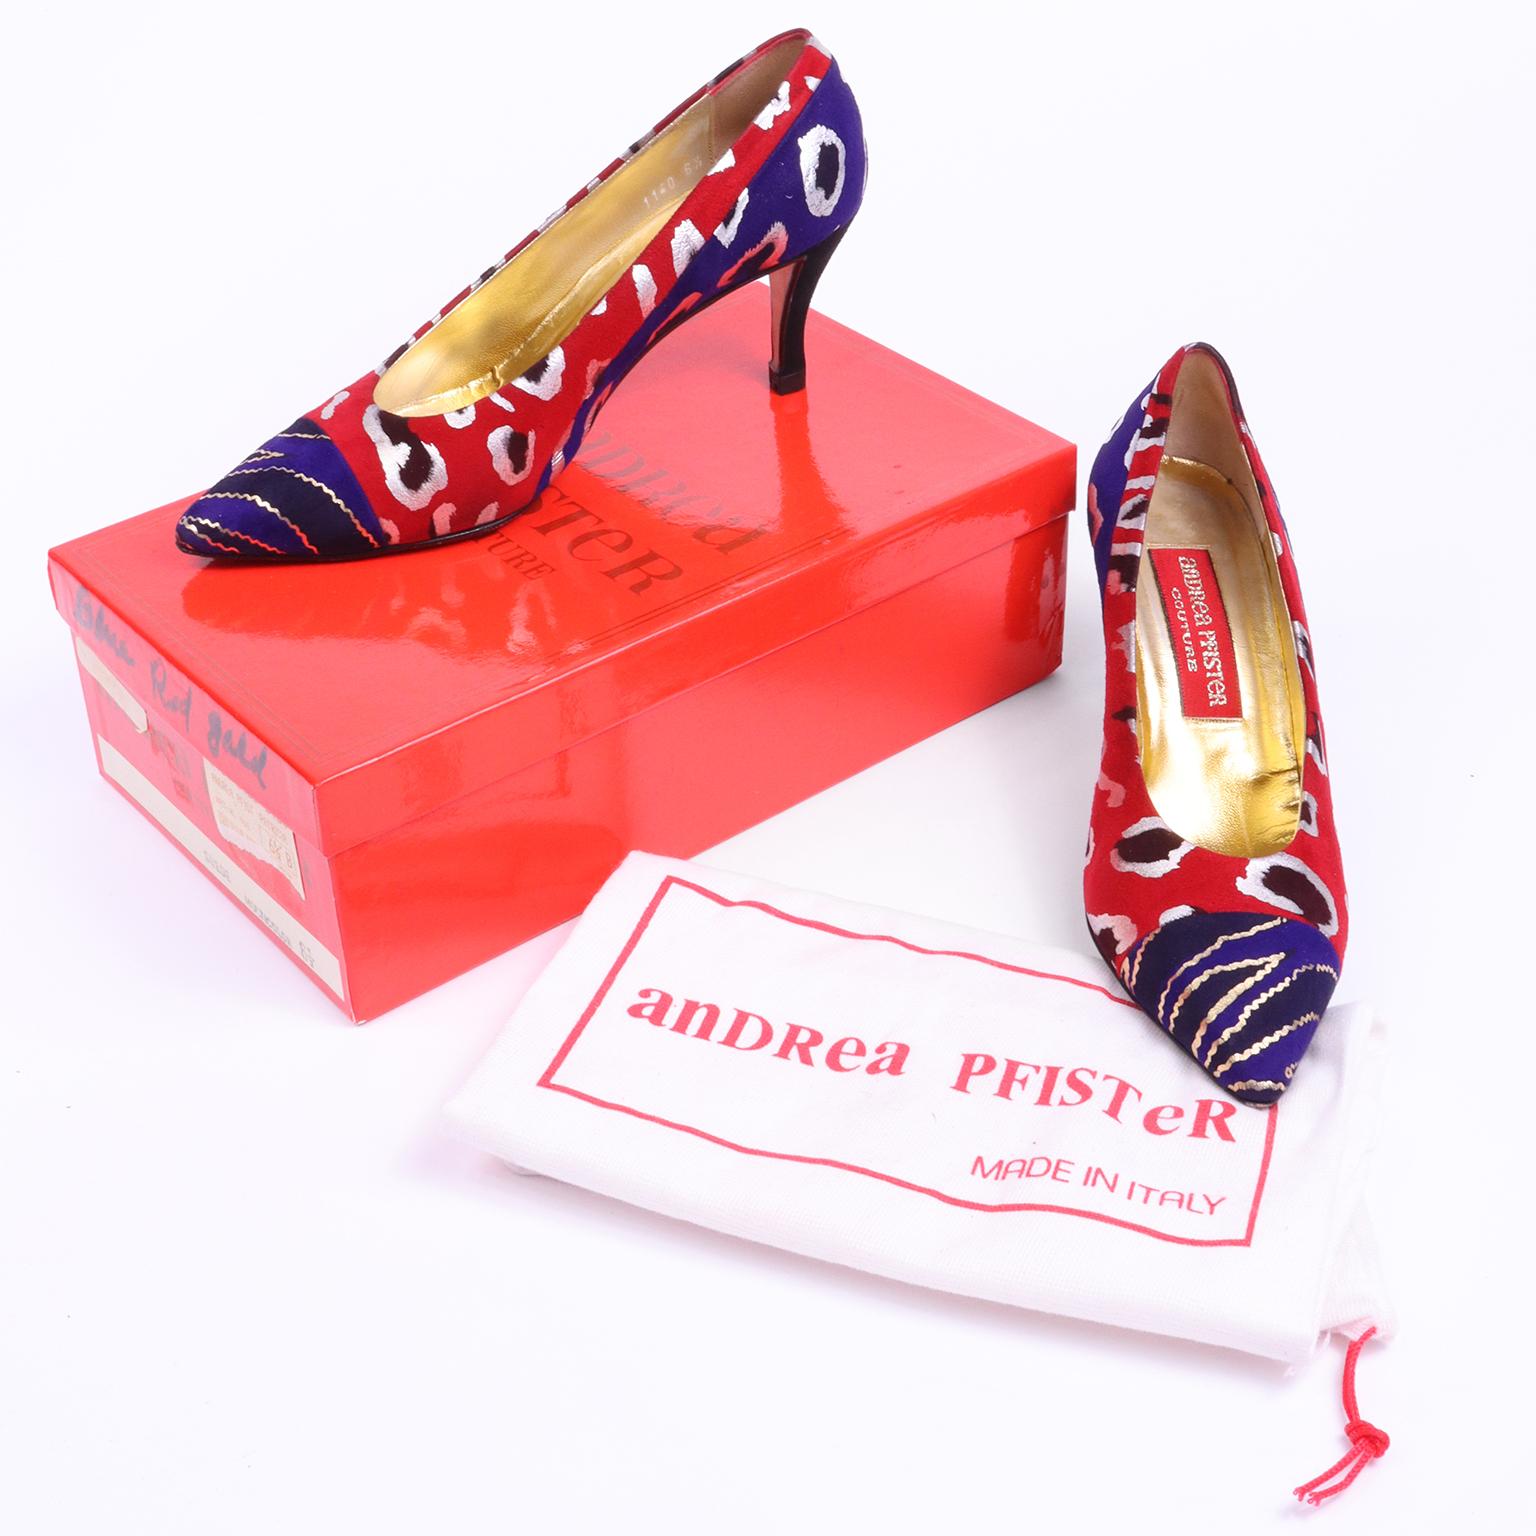 These are really fun vintage Andrea Pfister Couture multicolor suede pumps in a size 6 and 1/2. The shoes come with their original box and dust bag and the box and the style name is Patricia.  The shoes have gold and silver metallic details over